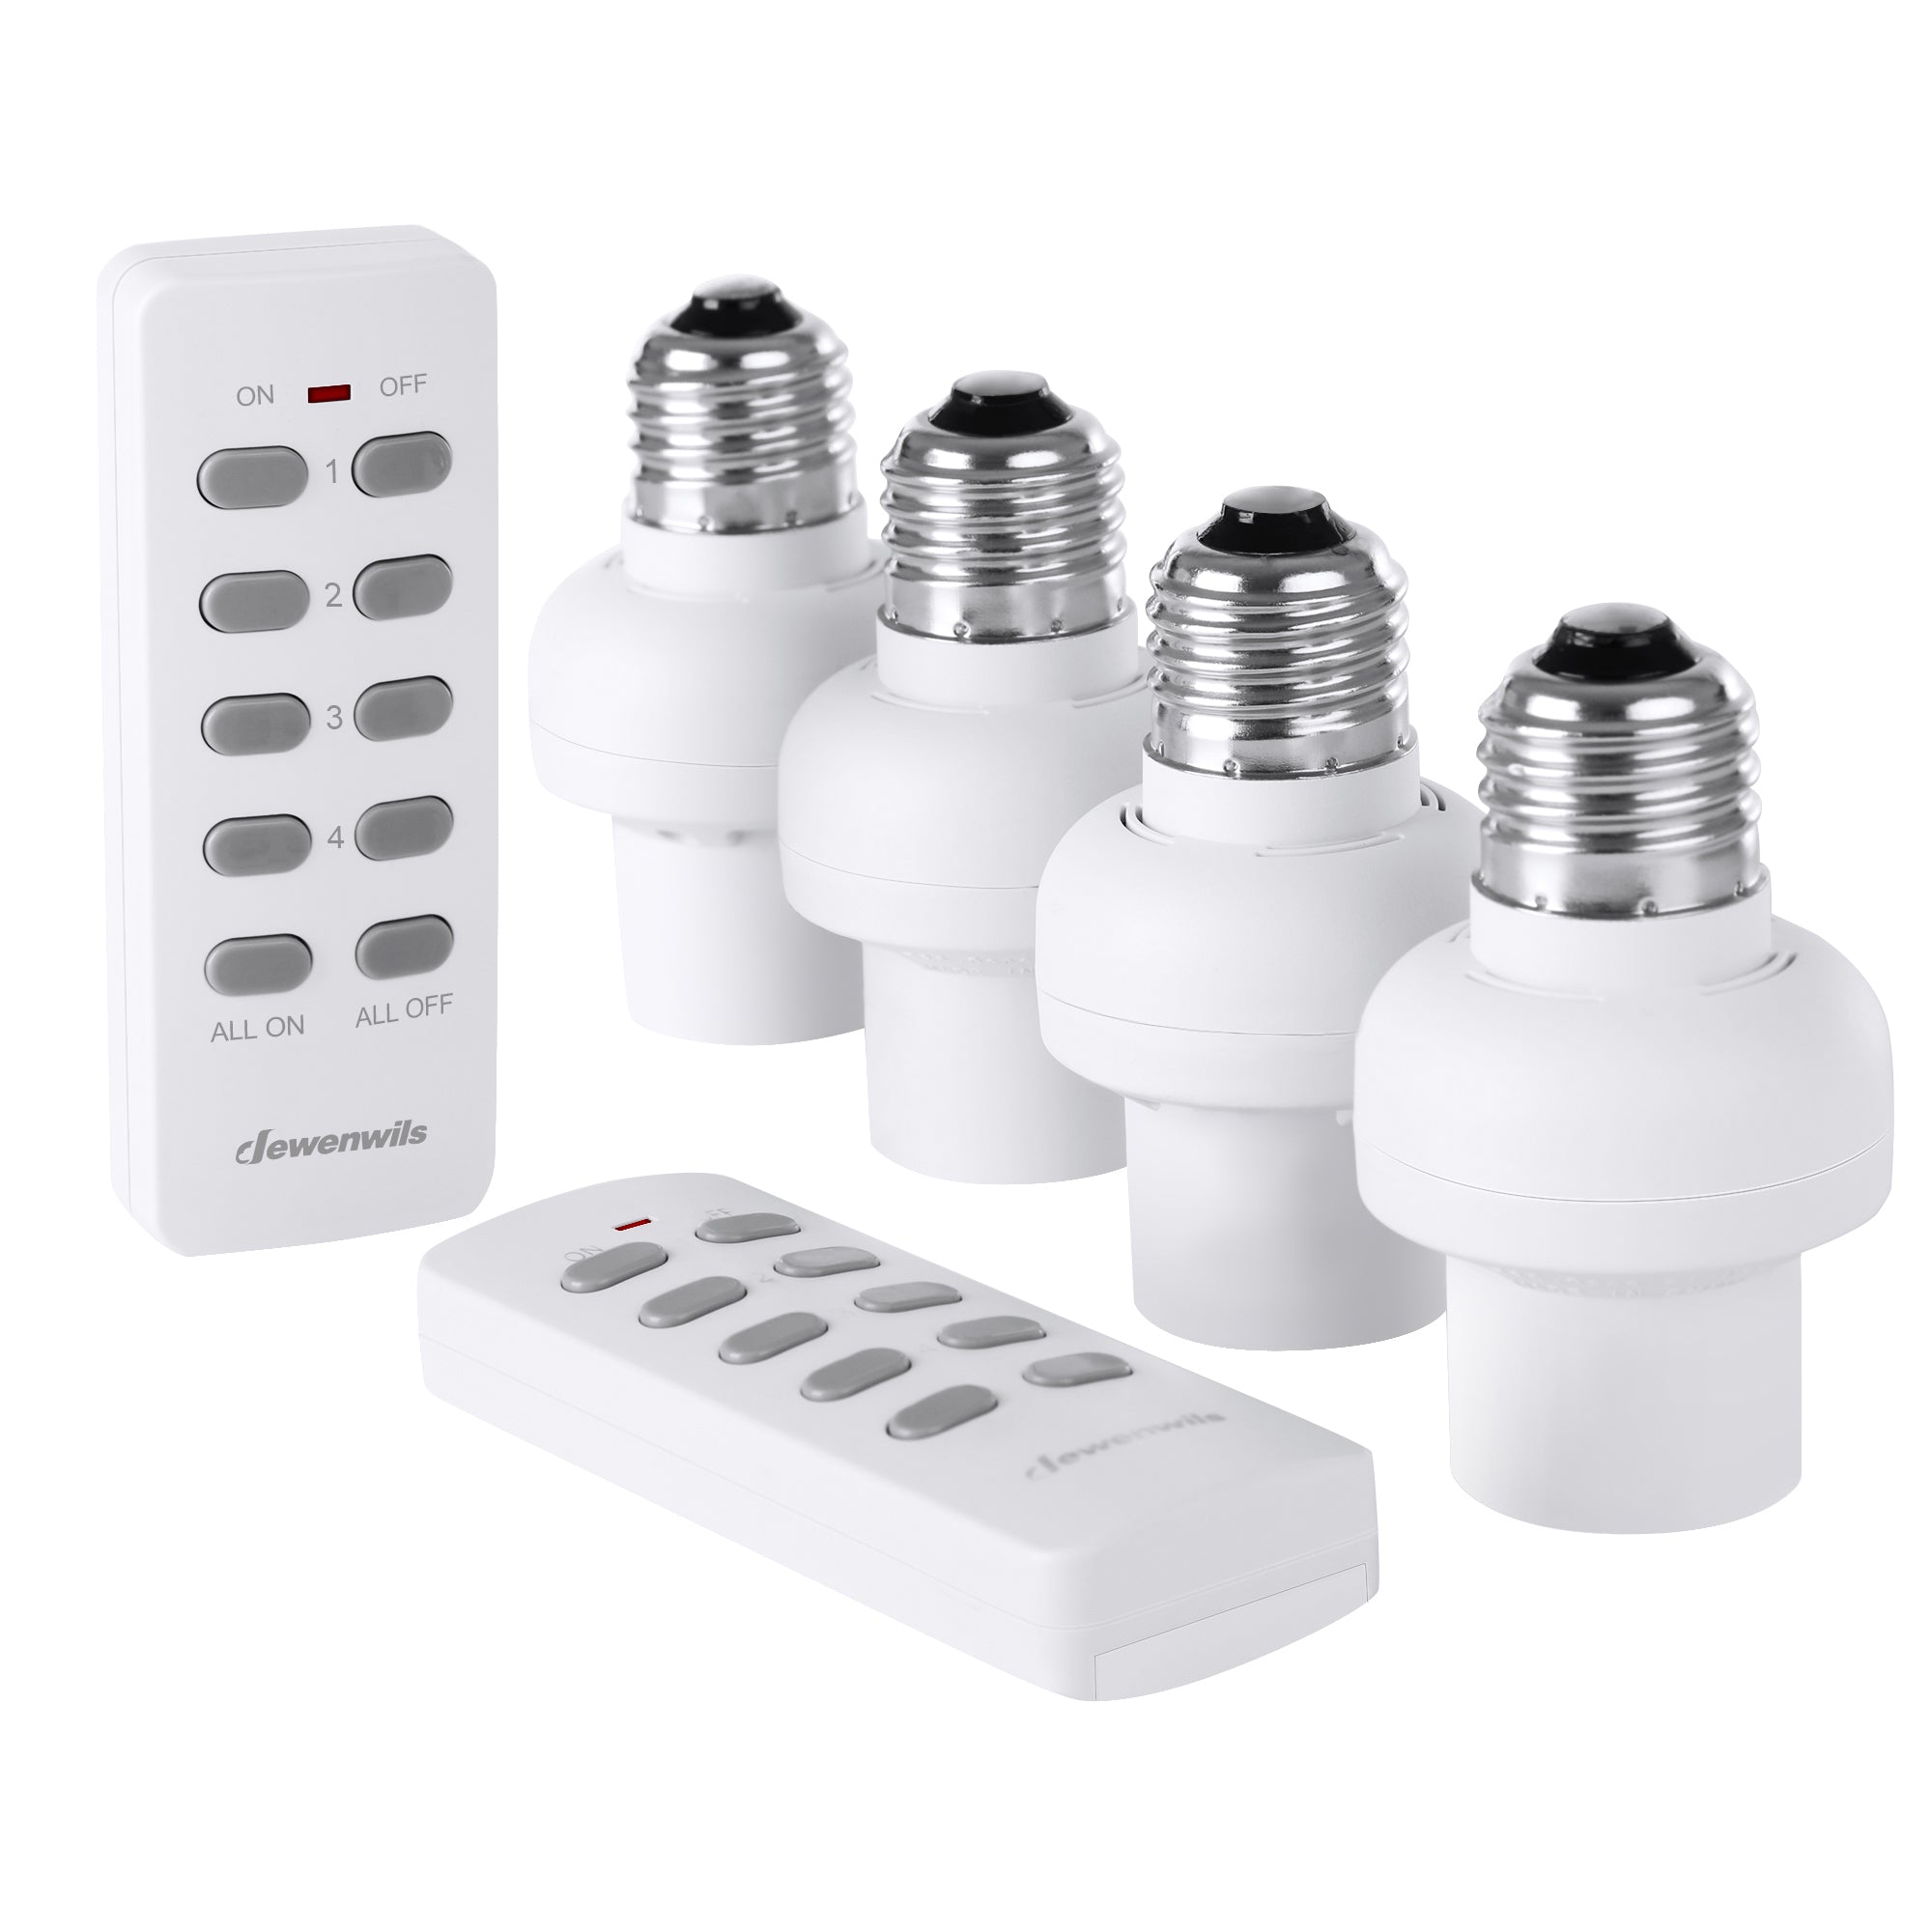 DEWENWILS Remote Control Light Bulb Socket E26/E27 Base for Pull Chain Light Fixture, No Wiring, ETL Listed(2 Remote+4 Socket)